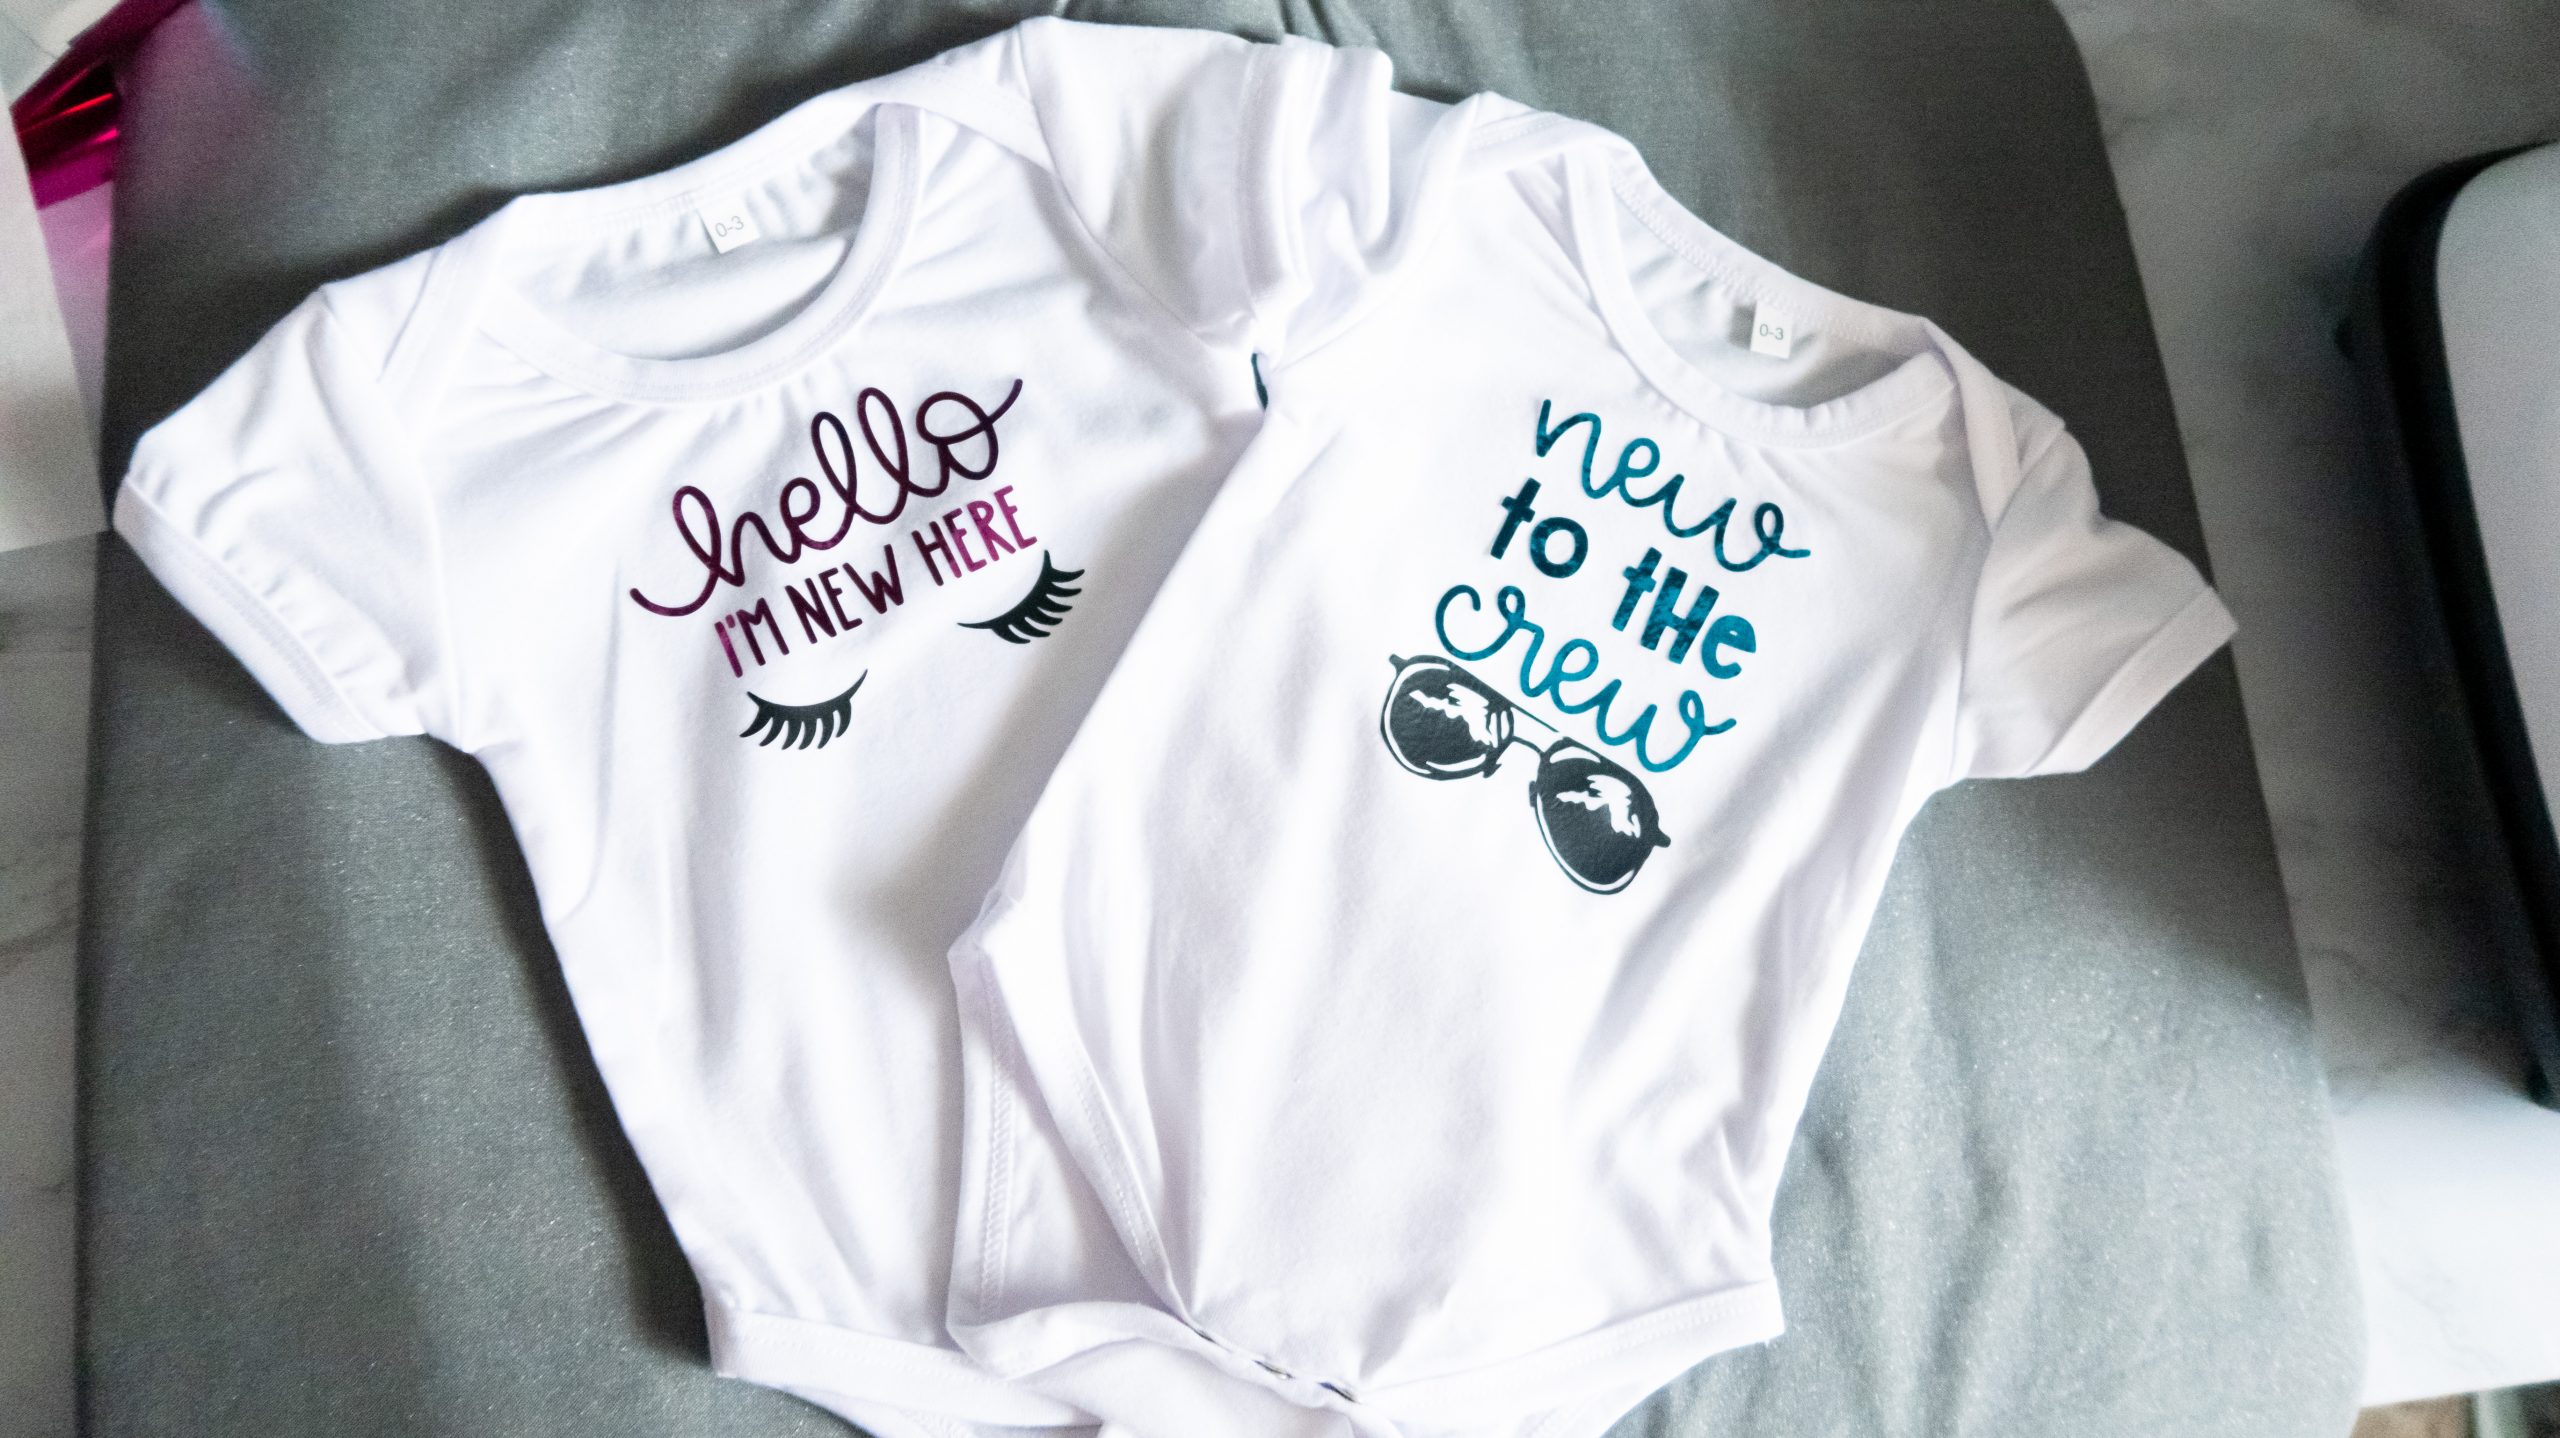 finished cricut explore air 2 project - baby onesies